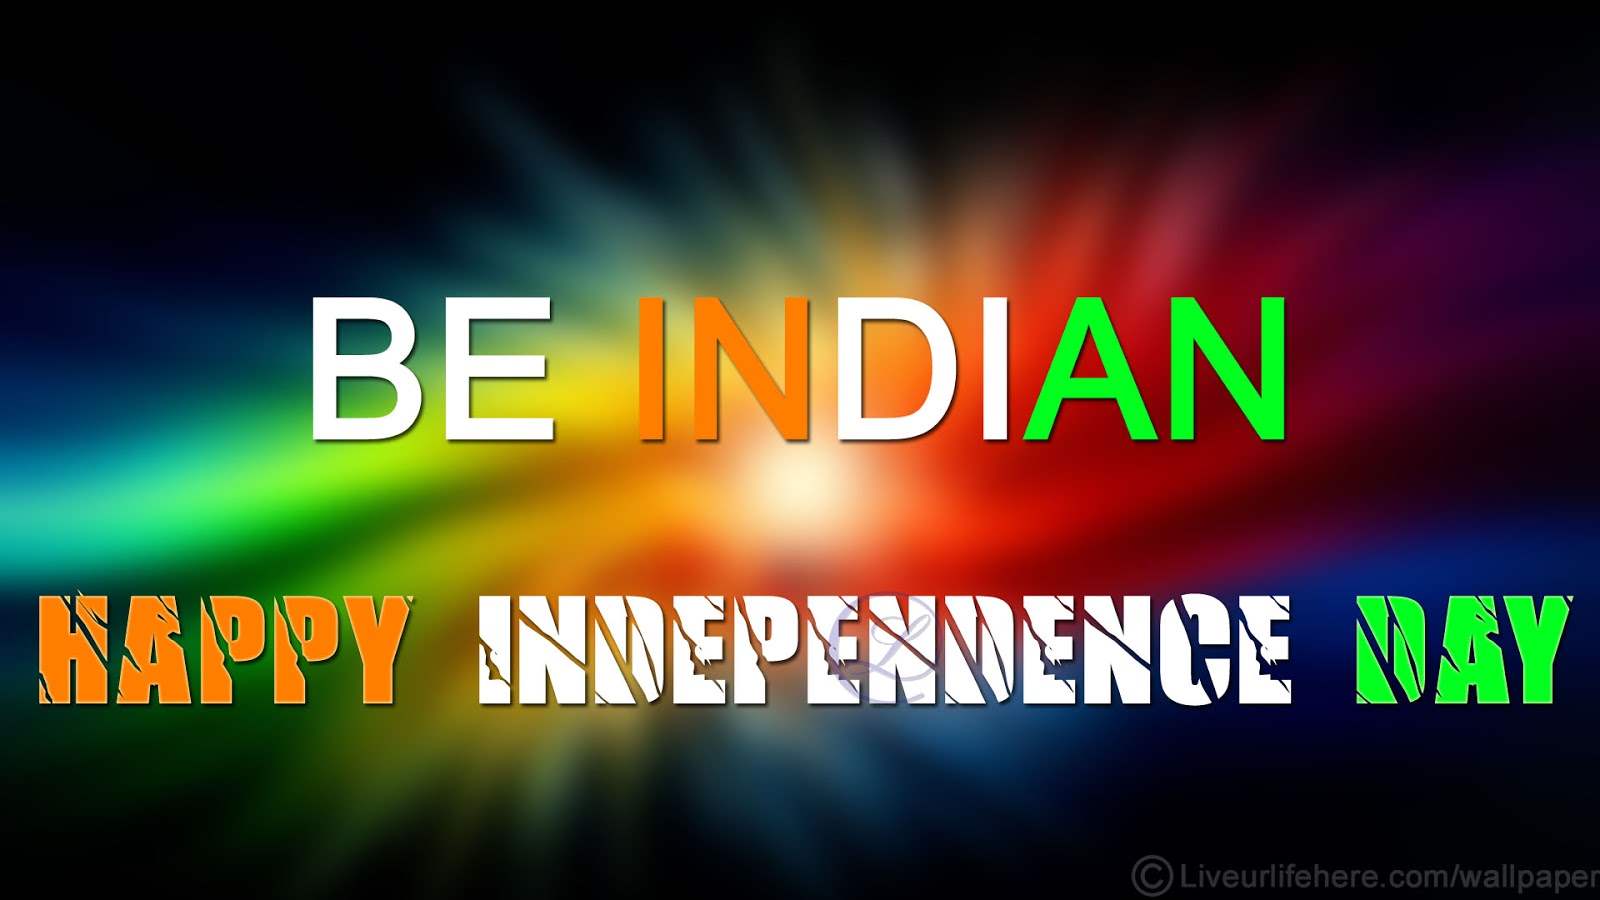 Indian Independence Day Cool WhatsApp Wallpapers - Status Arena